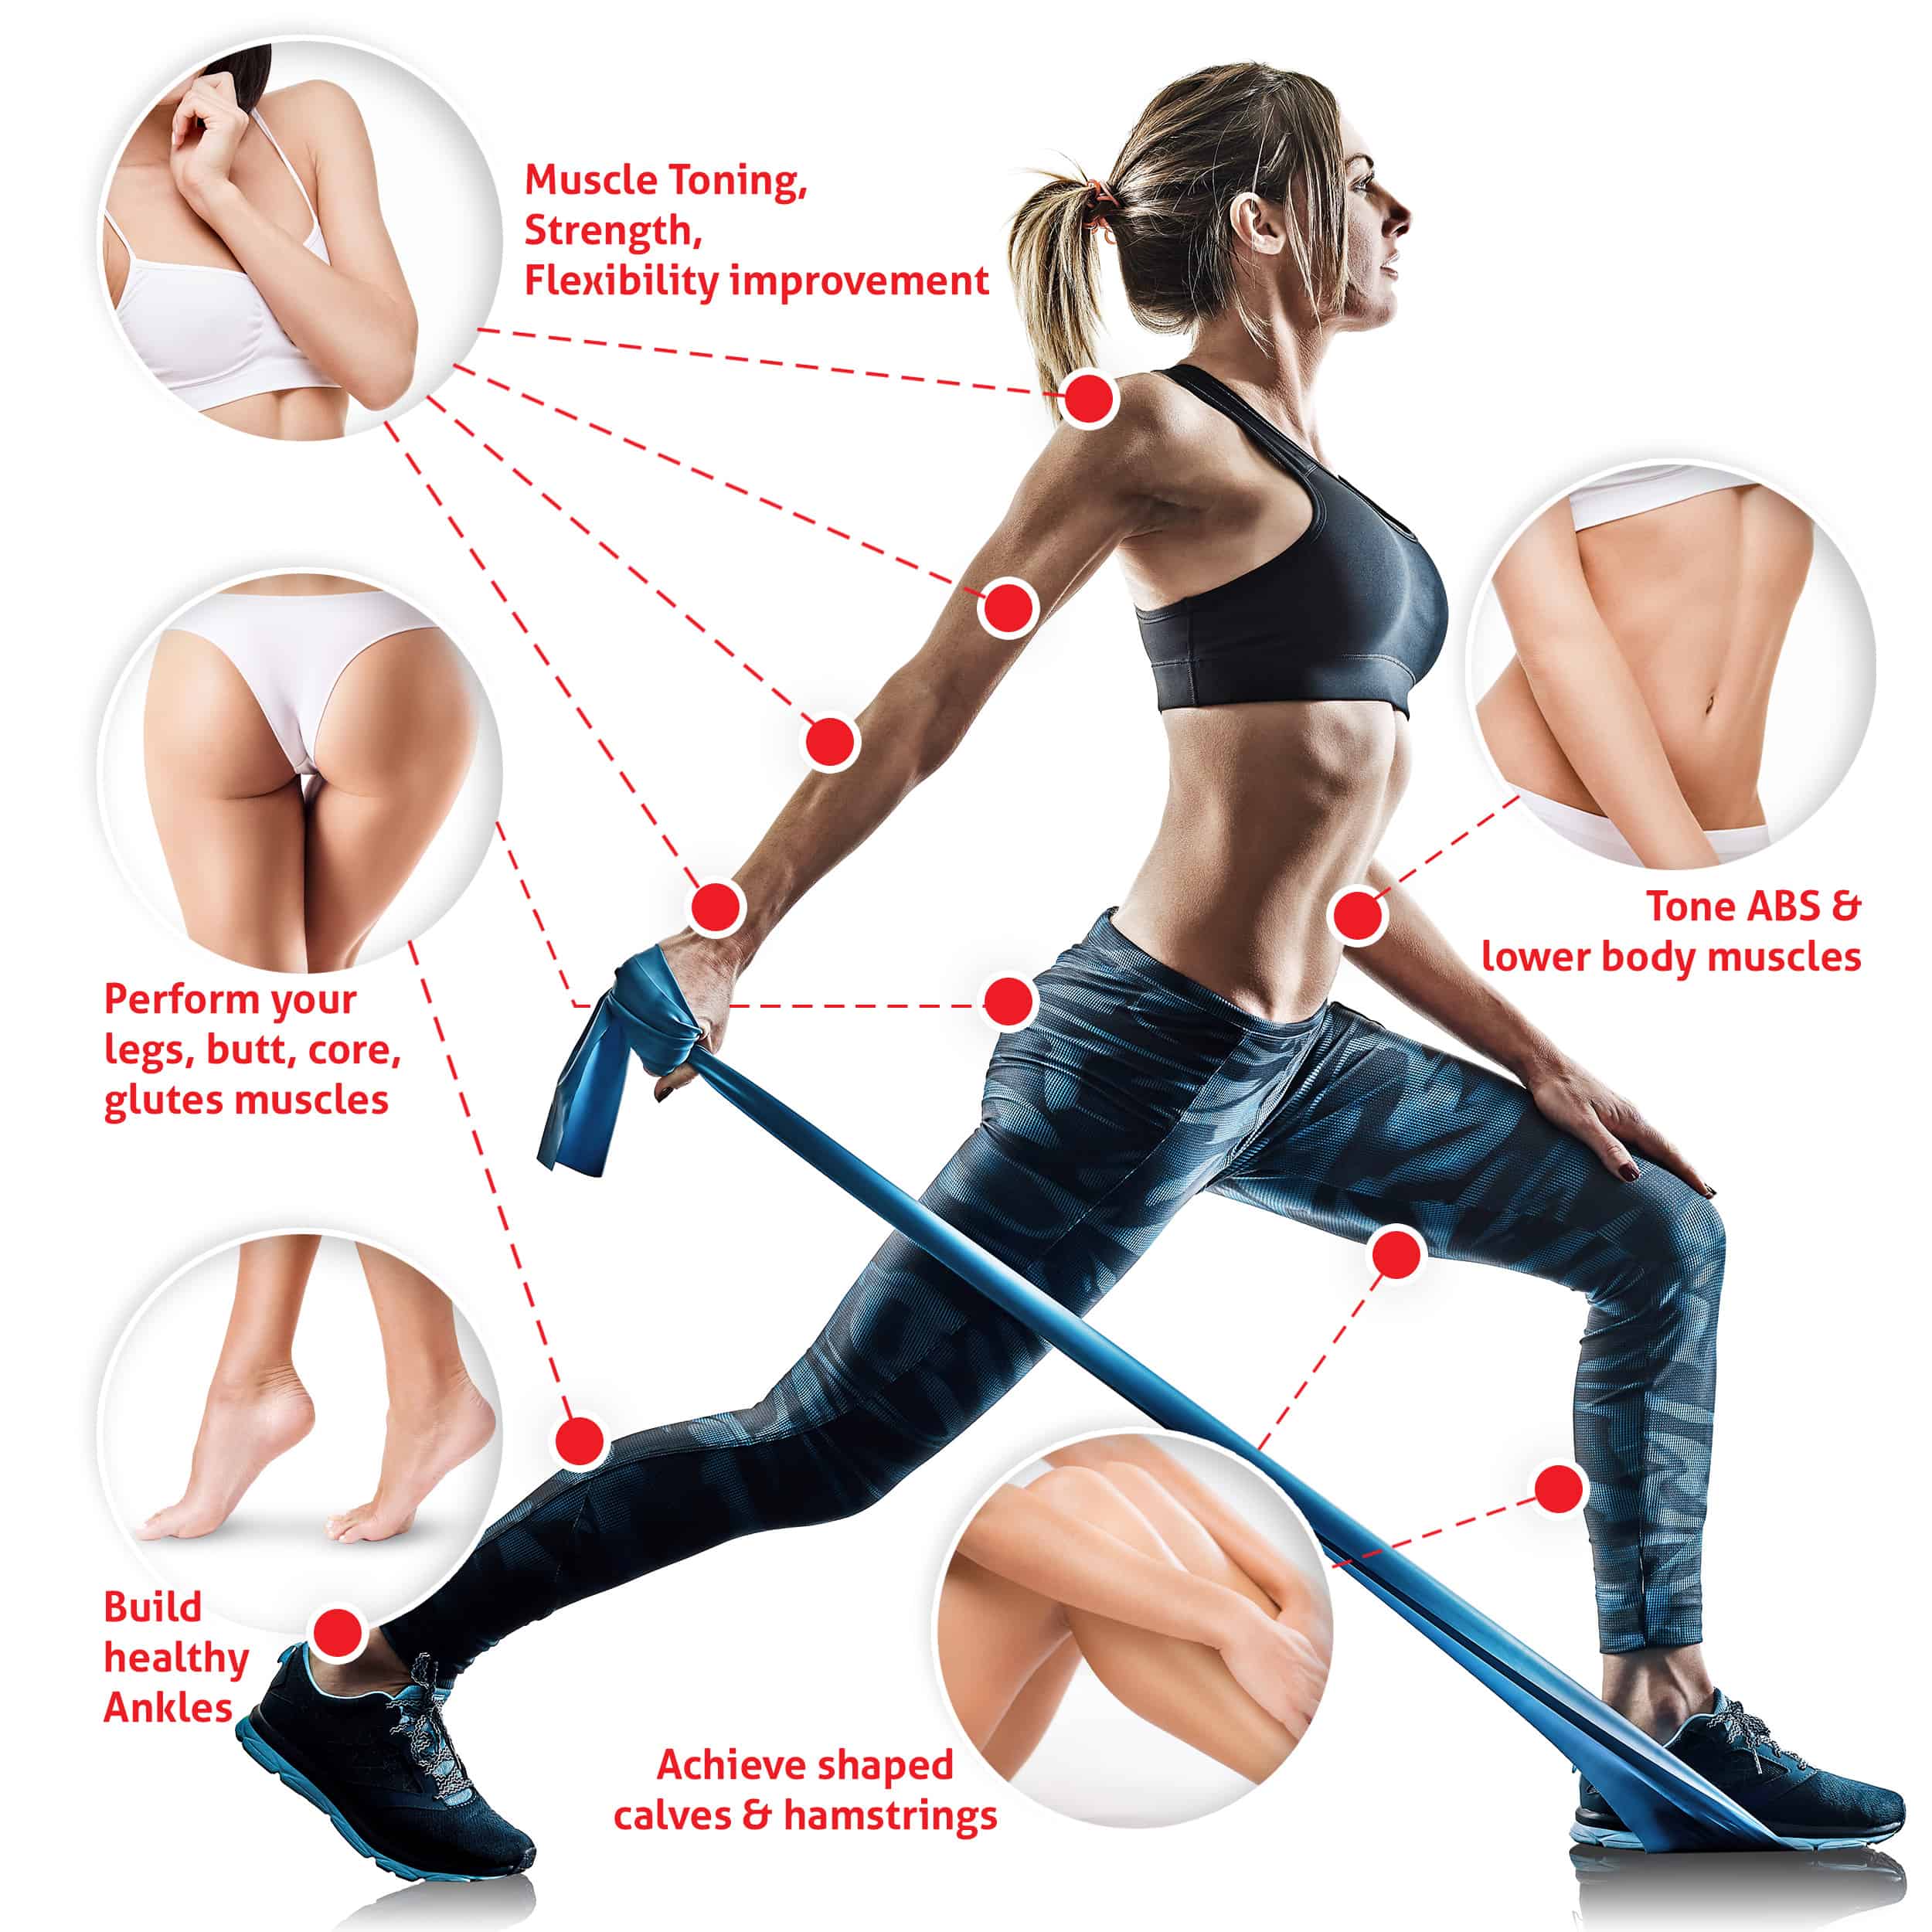 Resistance Band Exercises  Band workout, Stretch band exercises, Resistance  band exercises